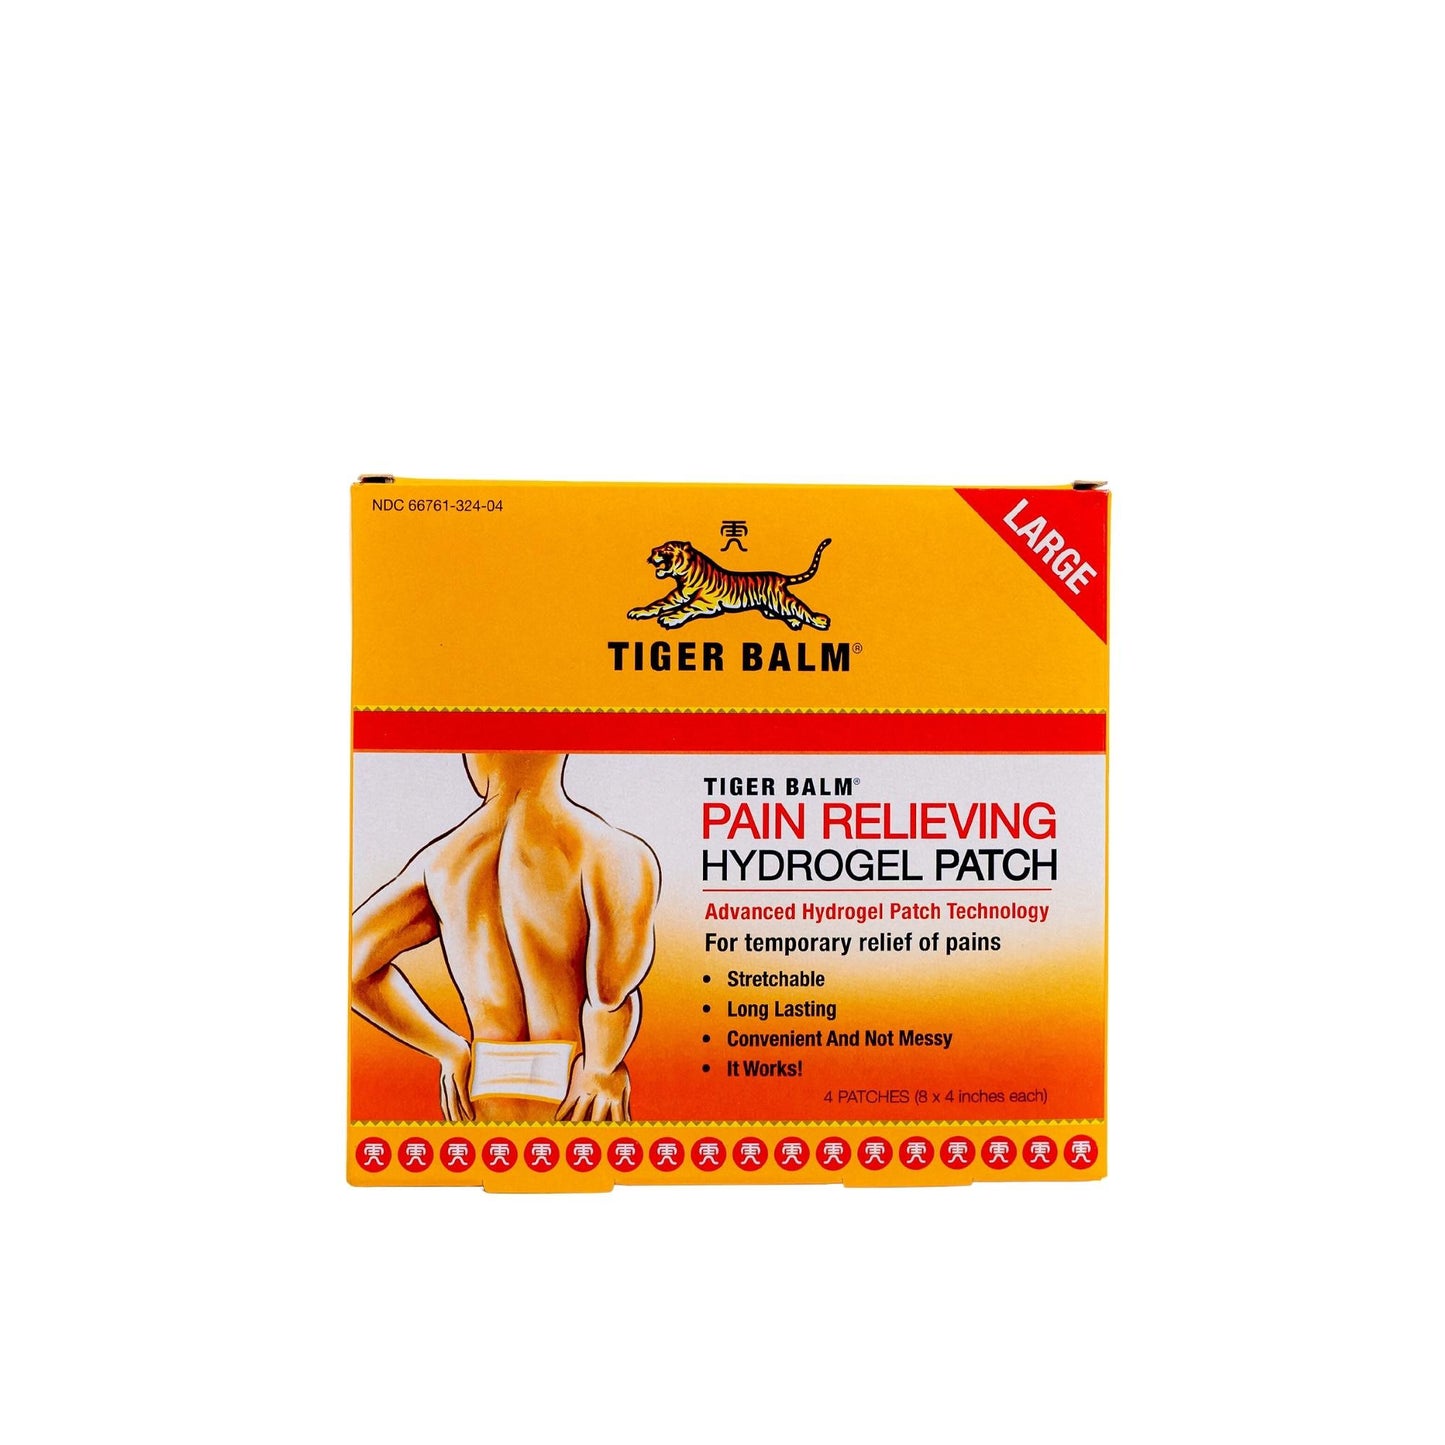 Tiger Balm Pain Relieving Hydrogel Patch